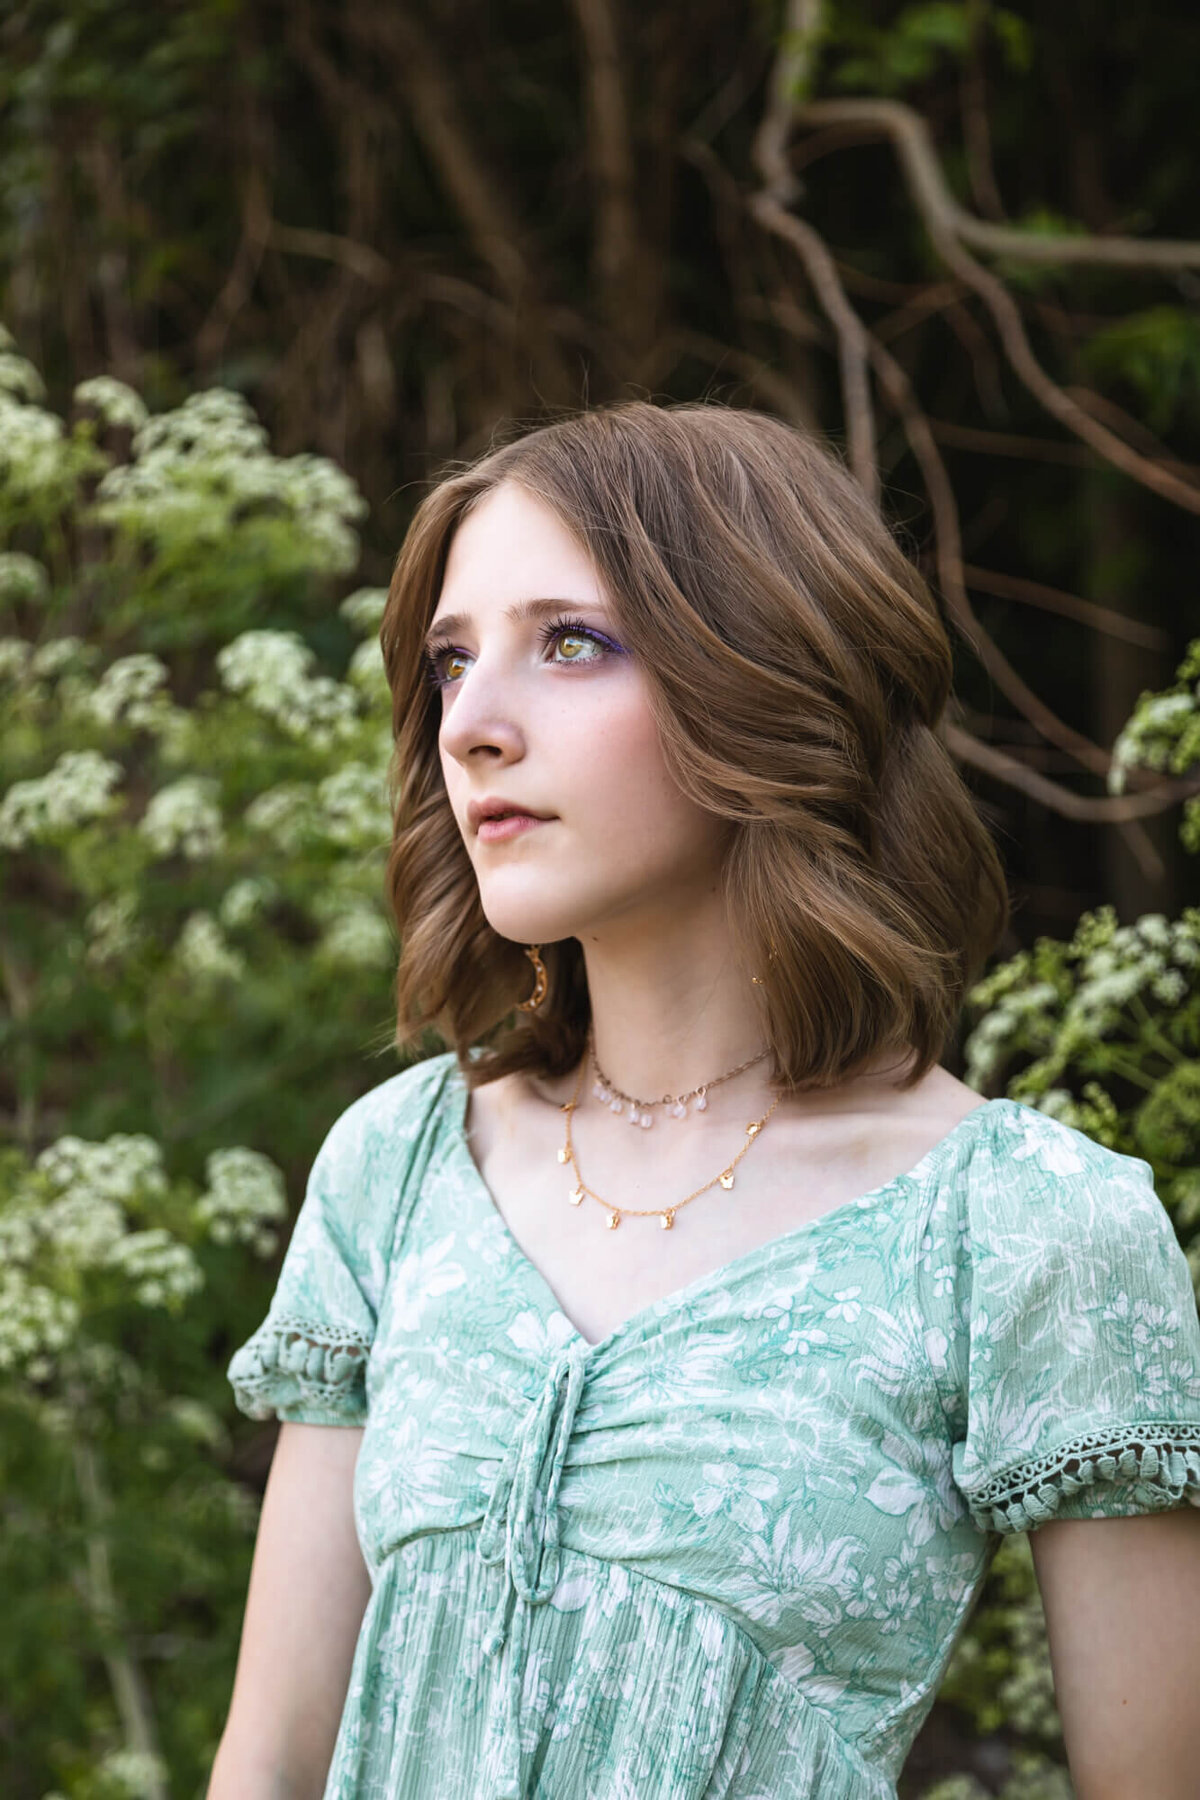 Striking portrait of a young teen girl with bobbed hair wearing a green floral dress in front of white flowers. Captured by Springfield, MO teen photographer Dynae Levingston.